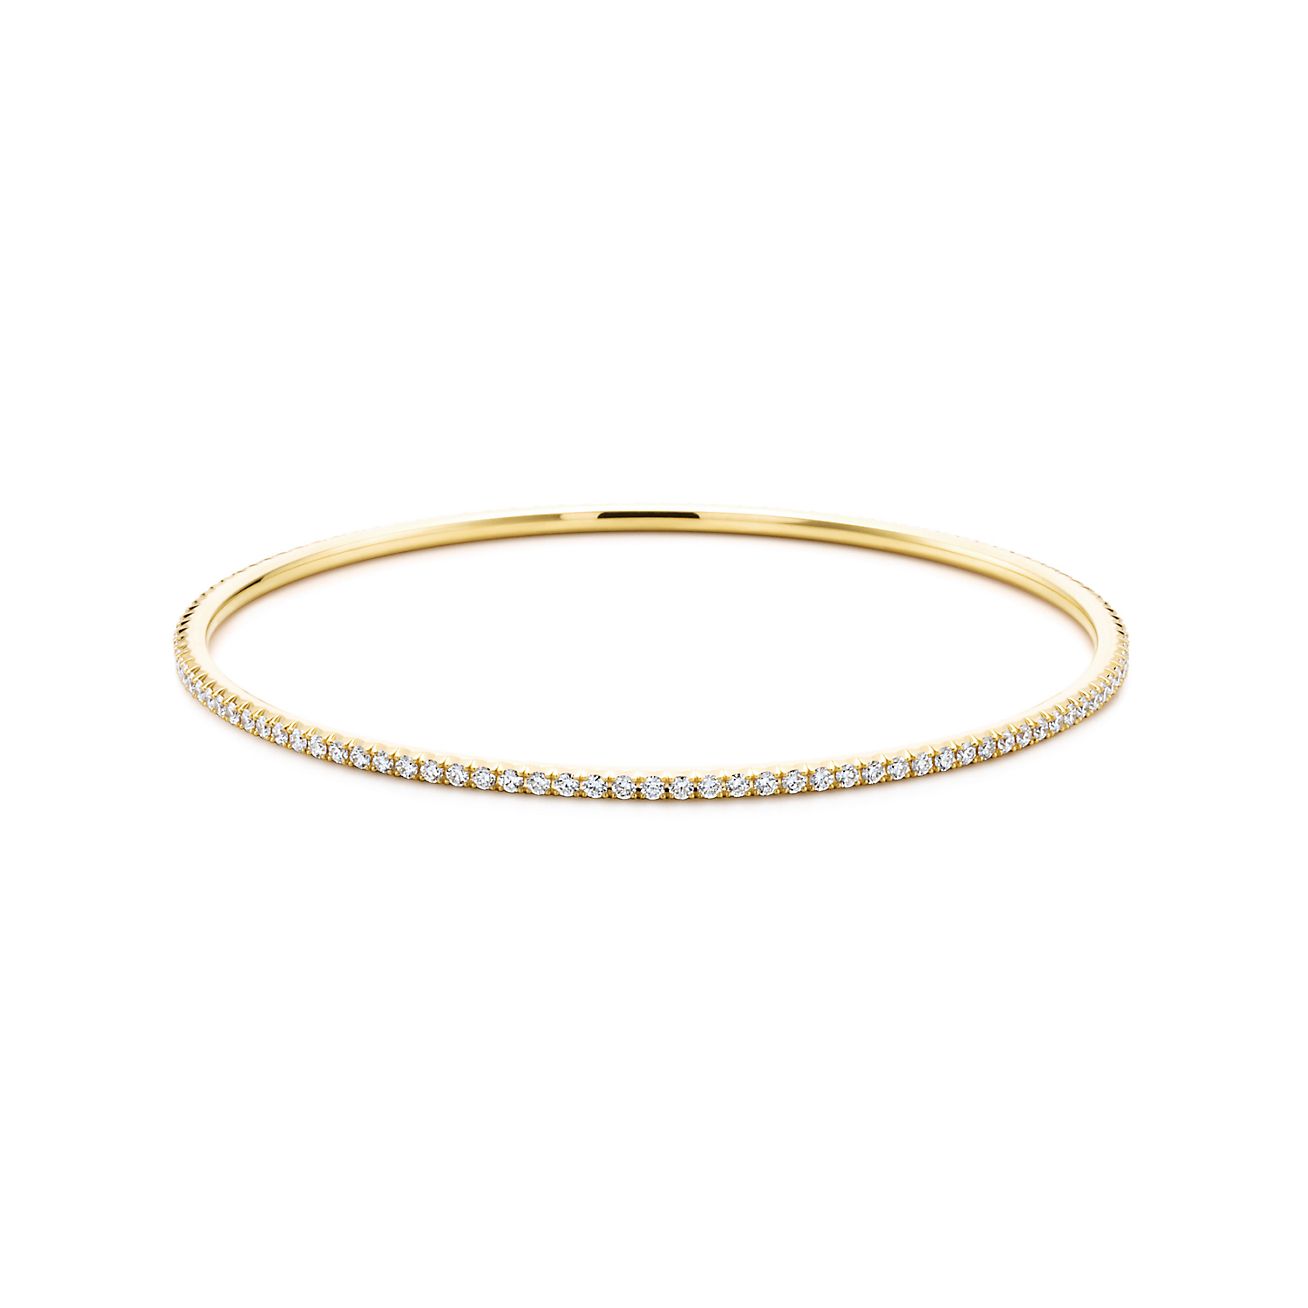 Tiffany Metro bangle in 18k gold with 